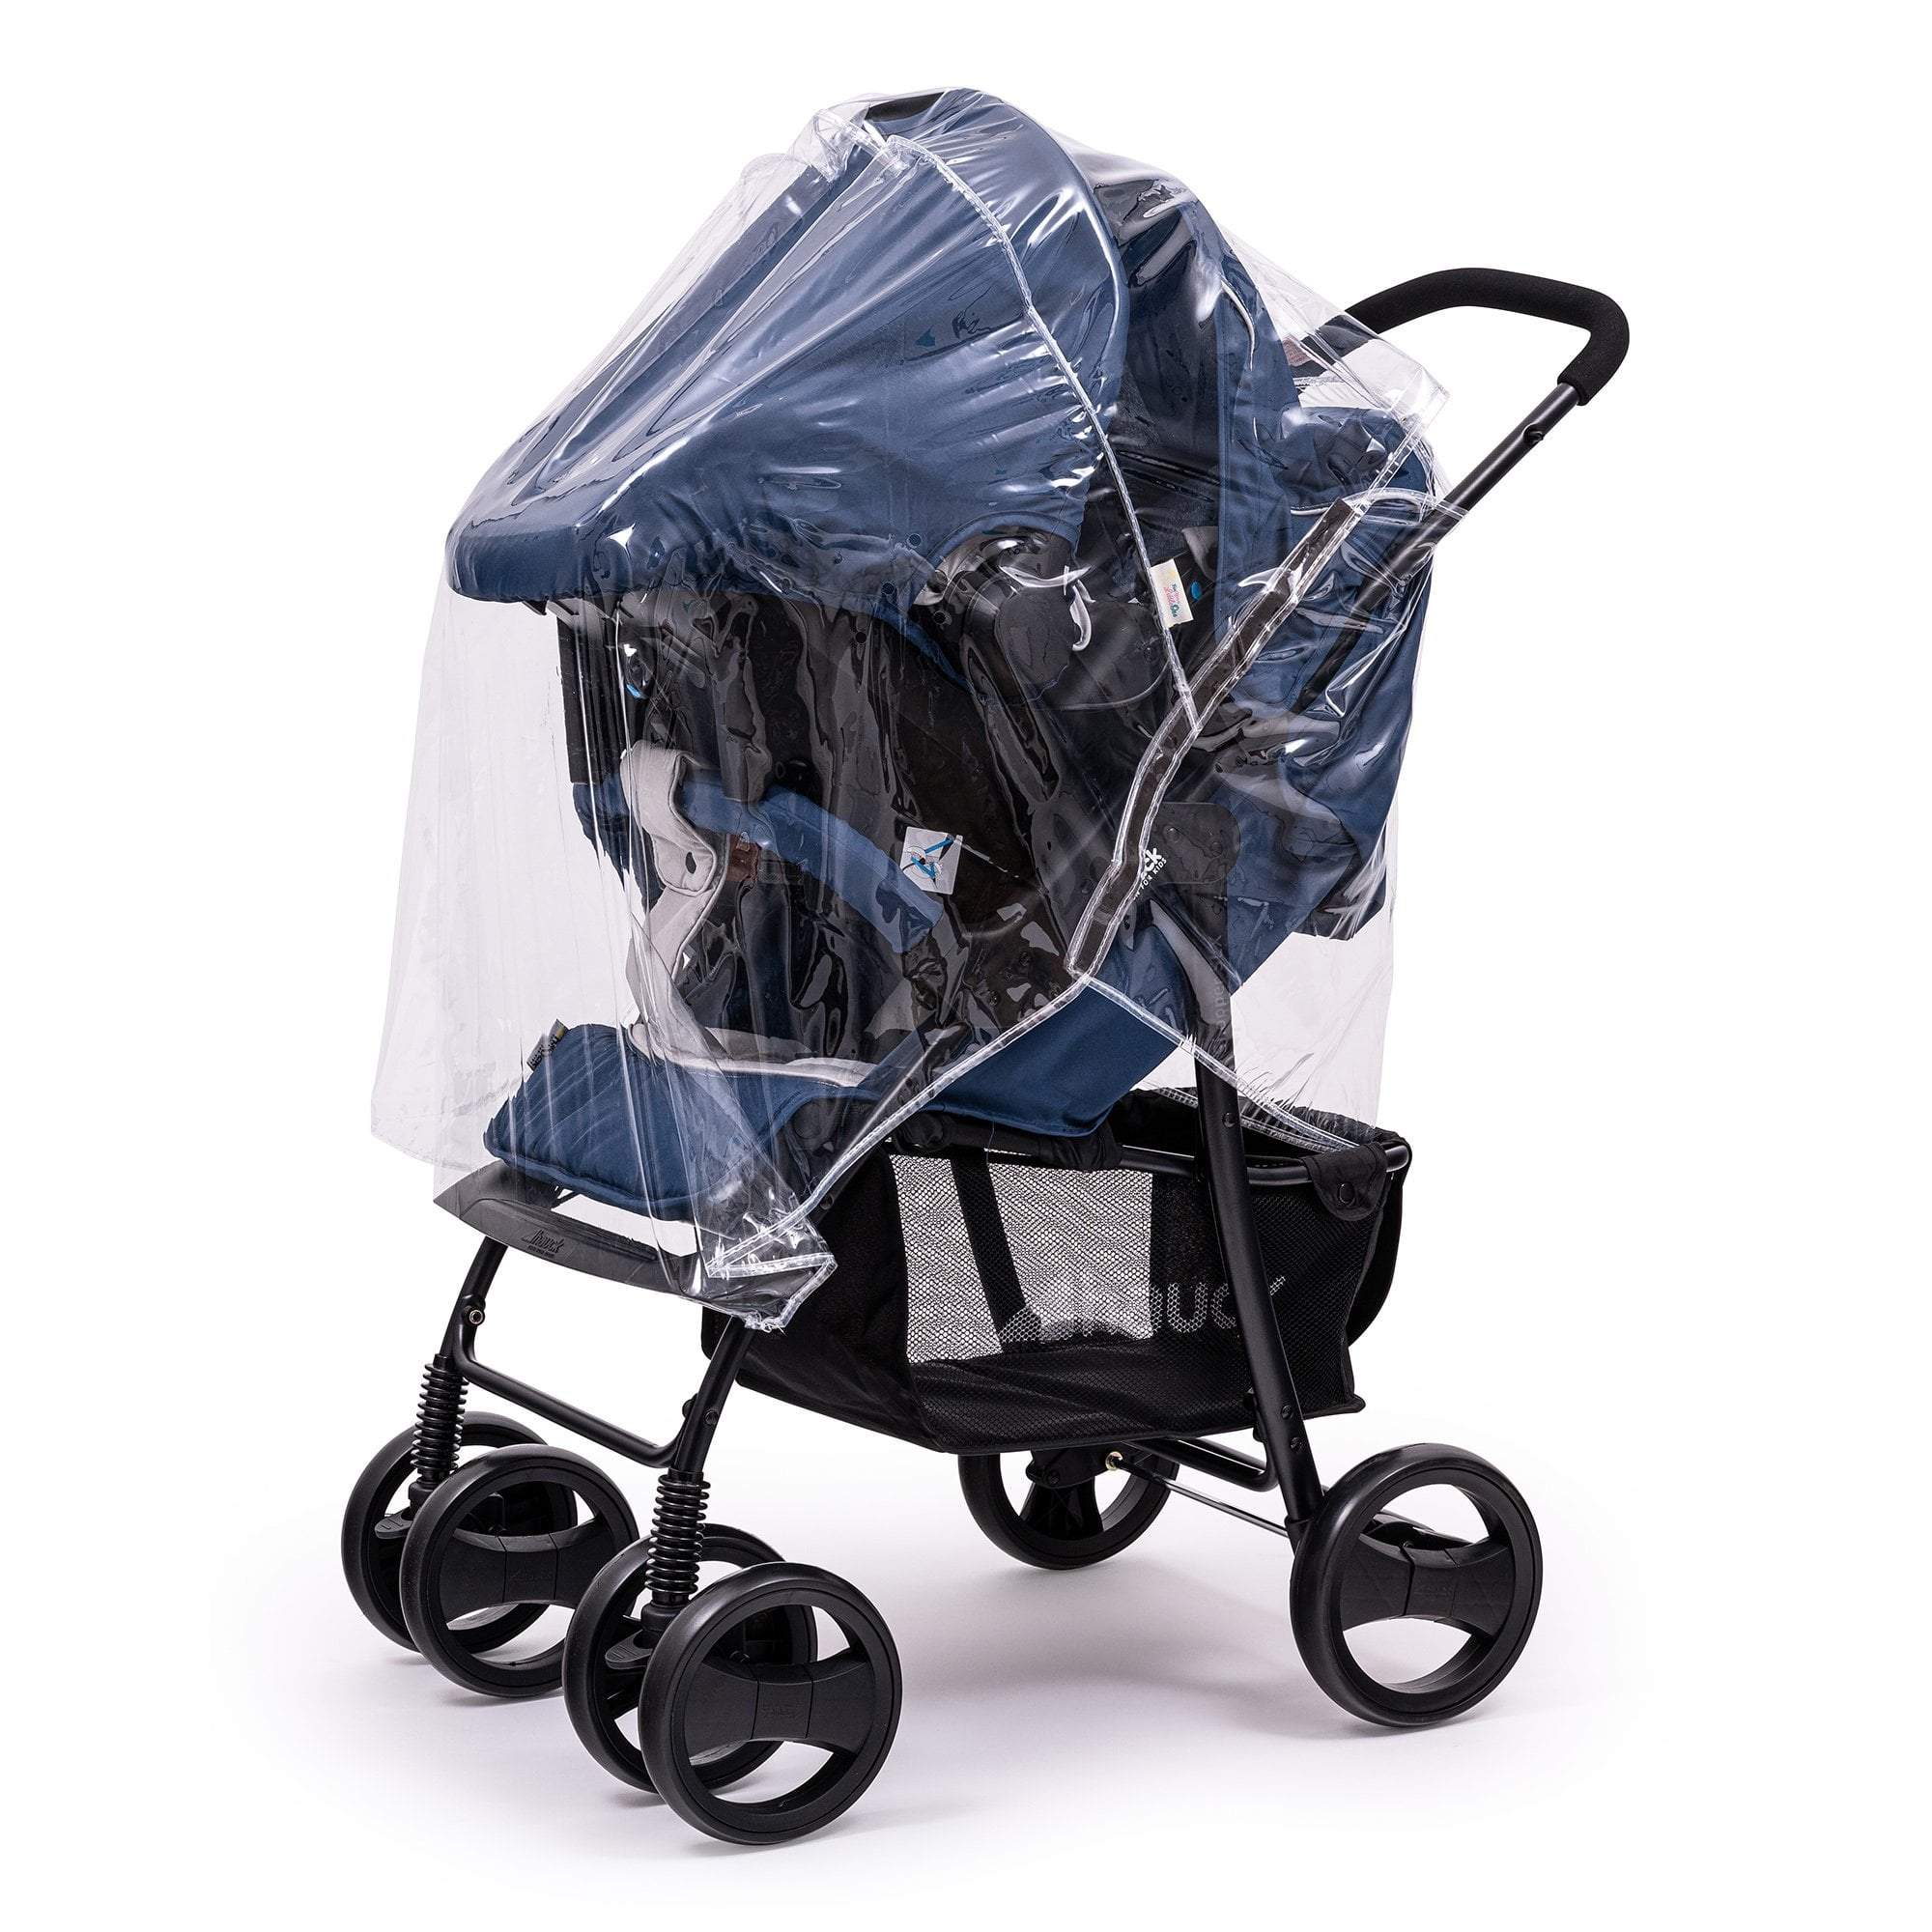 Travel System Raincover Compatible with ABC Design - Fits All Models - For Your Little One